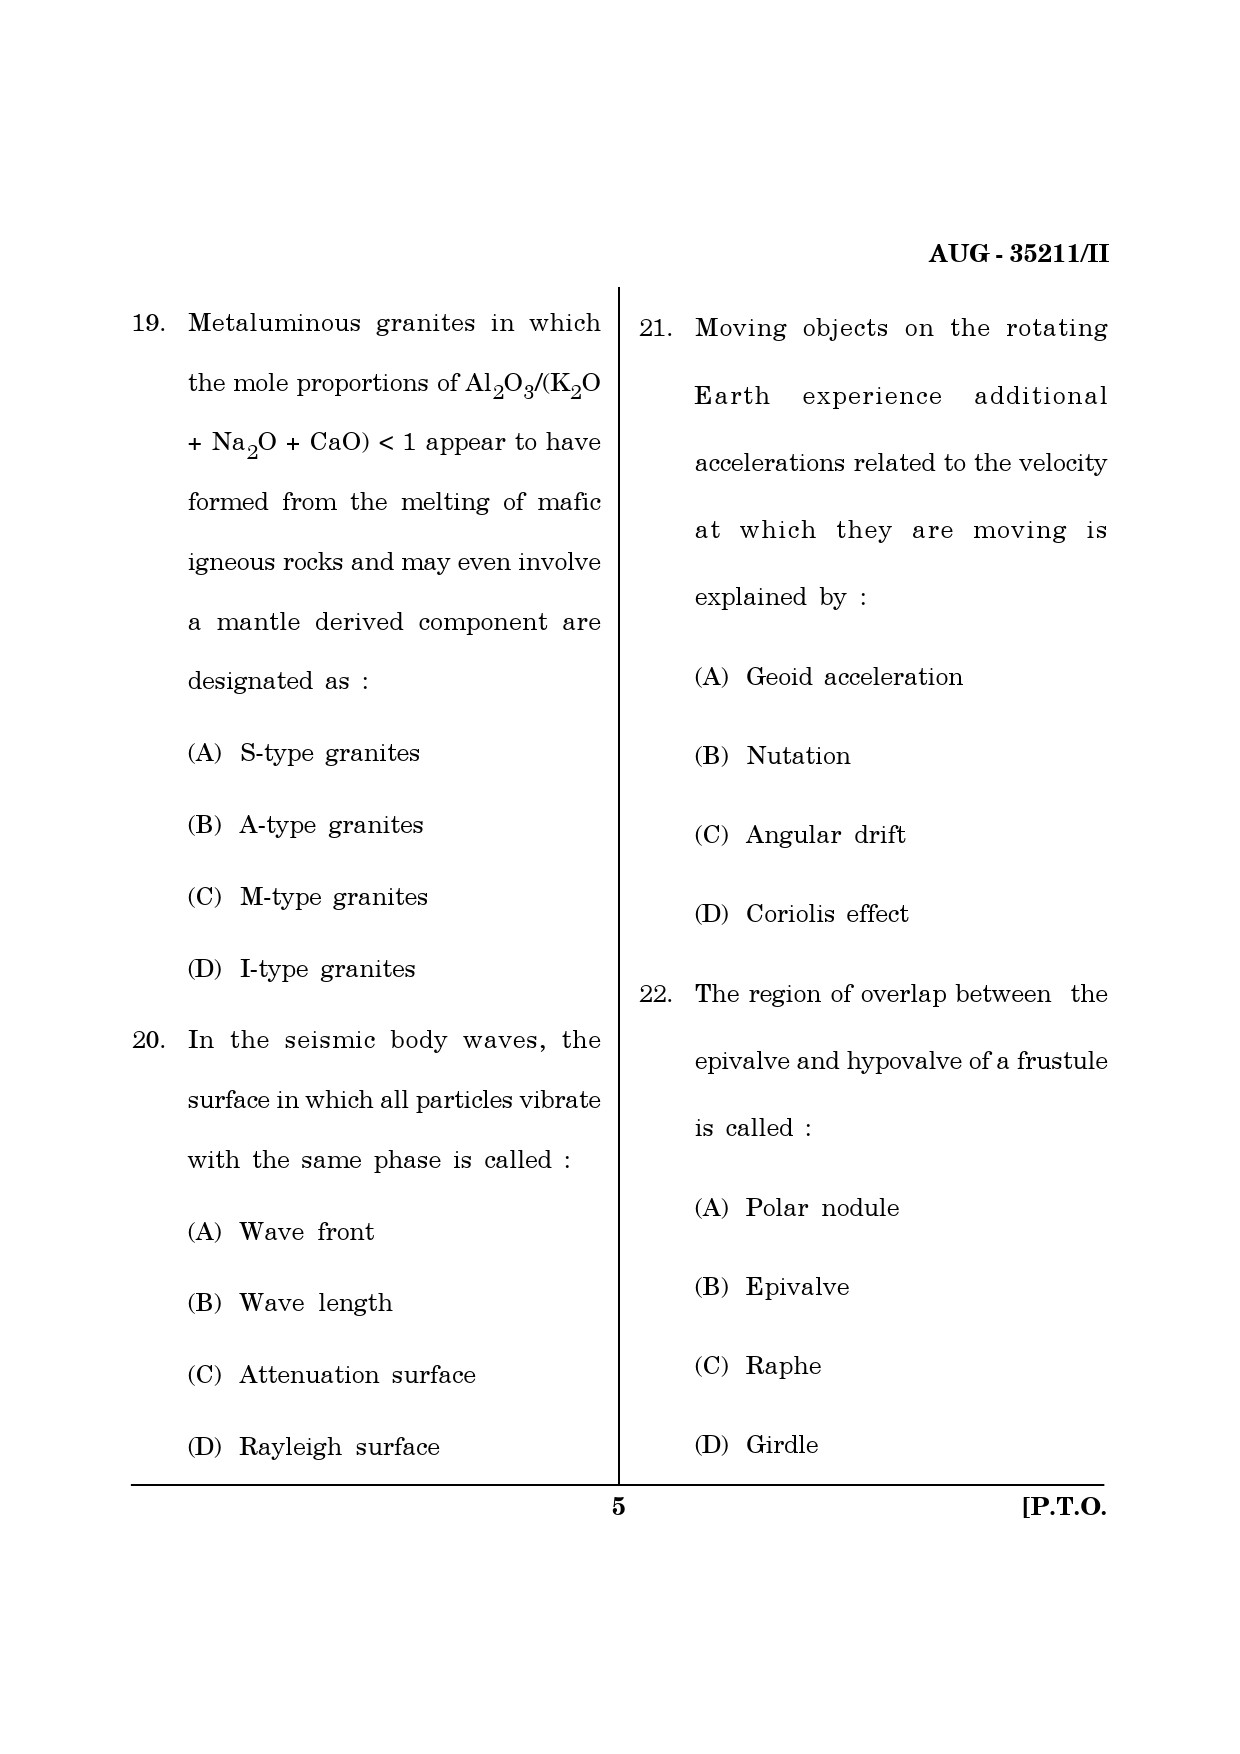 Maharashtra SET Earth Atmospheric Ocean Planetary Science Question Paper II August 2011 5